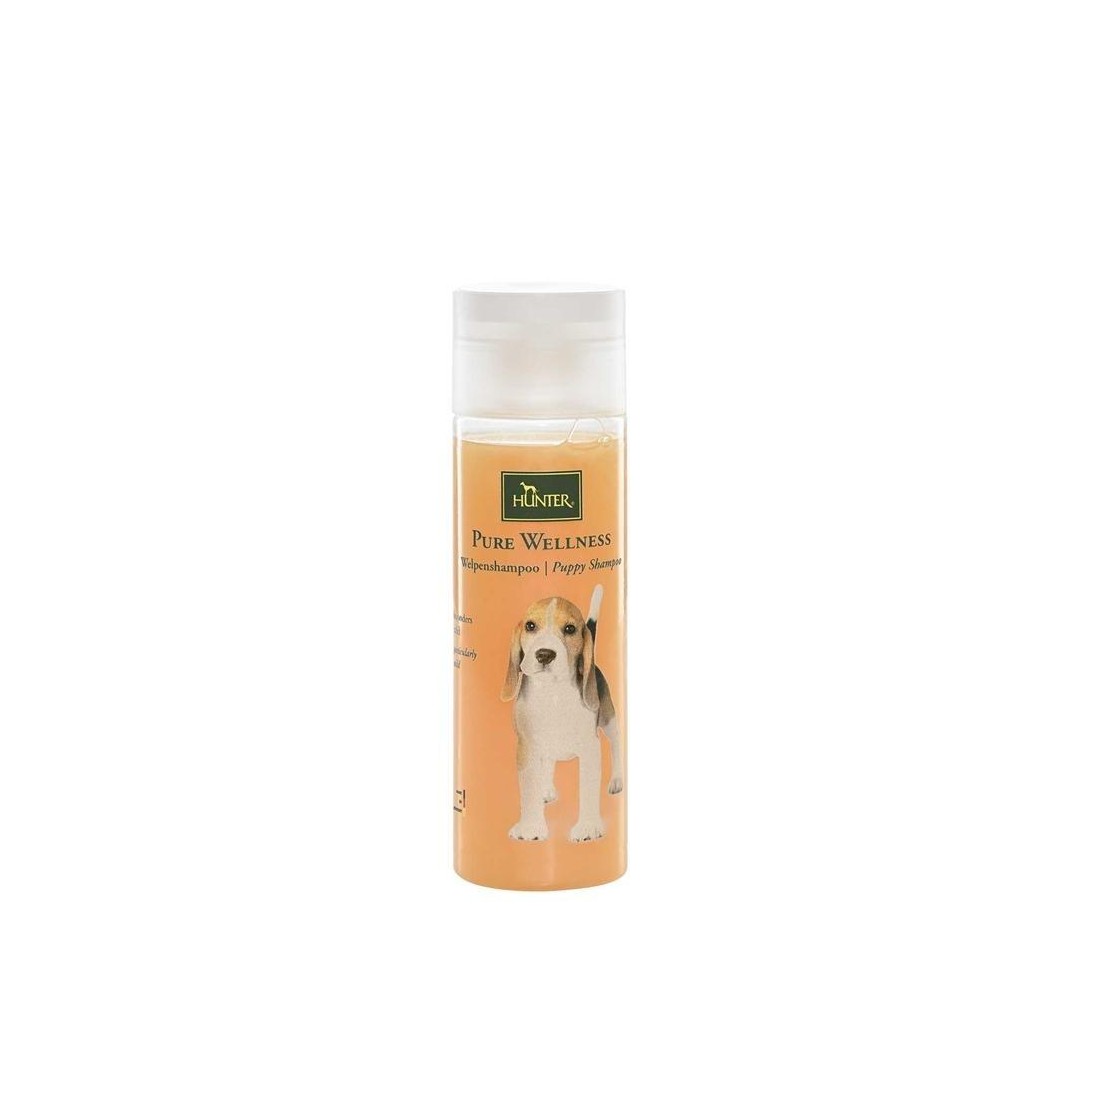 SHAMPOING POUR CHIOT REF 62027